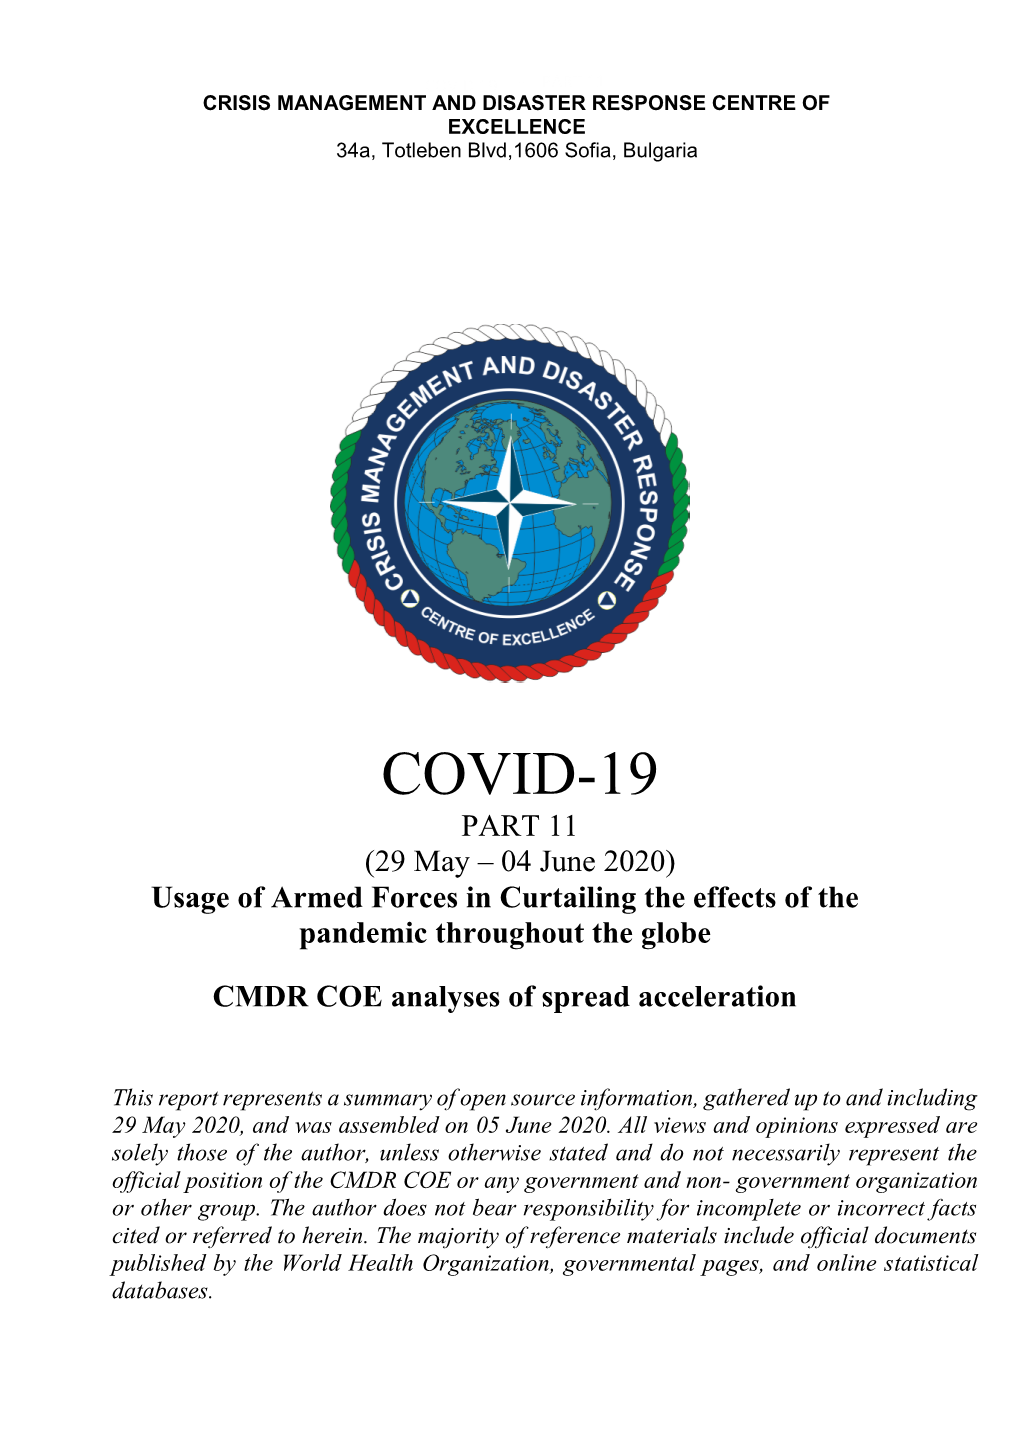 COVID 19 - PART 11 CRISIS MANAGEMENT and DISASTER RESPONSE CENTRE of EXCELLENCE 34A, Totleben Blvd,1606 Sofia, Bulgaria